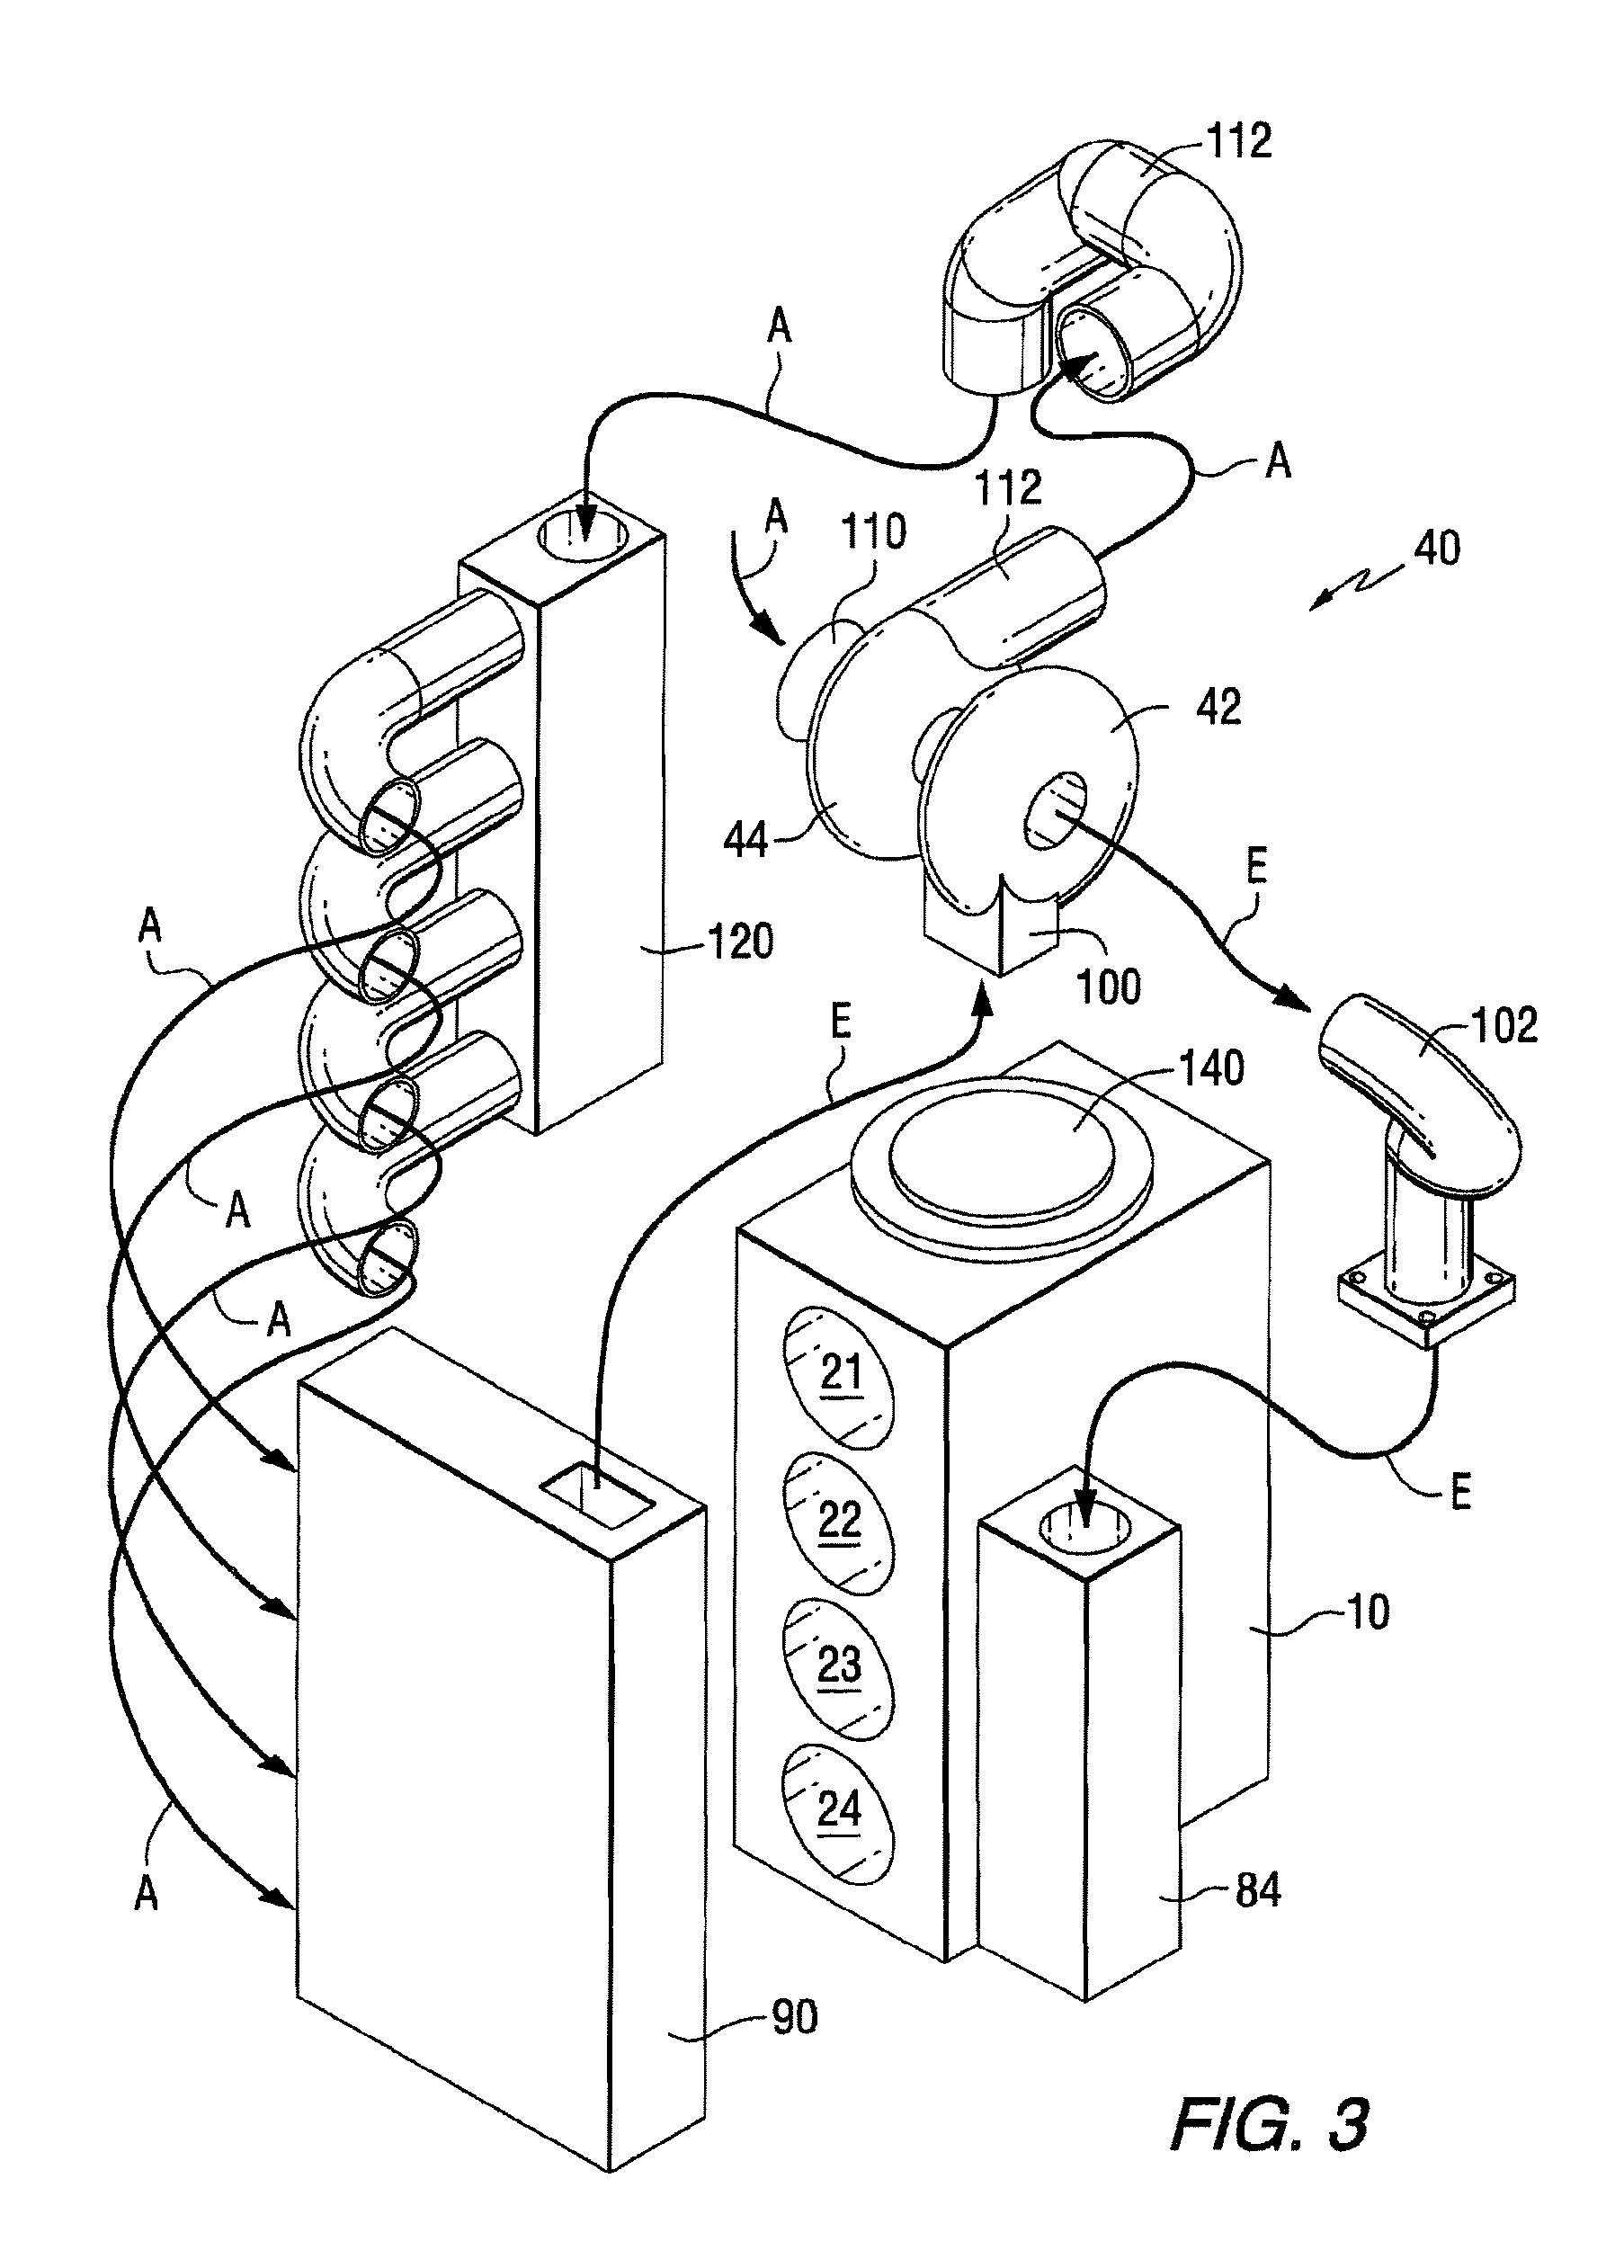 Turbocharger configuration for an outboard motor